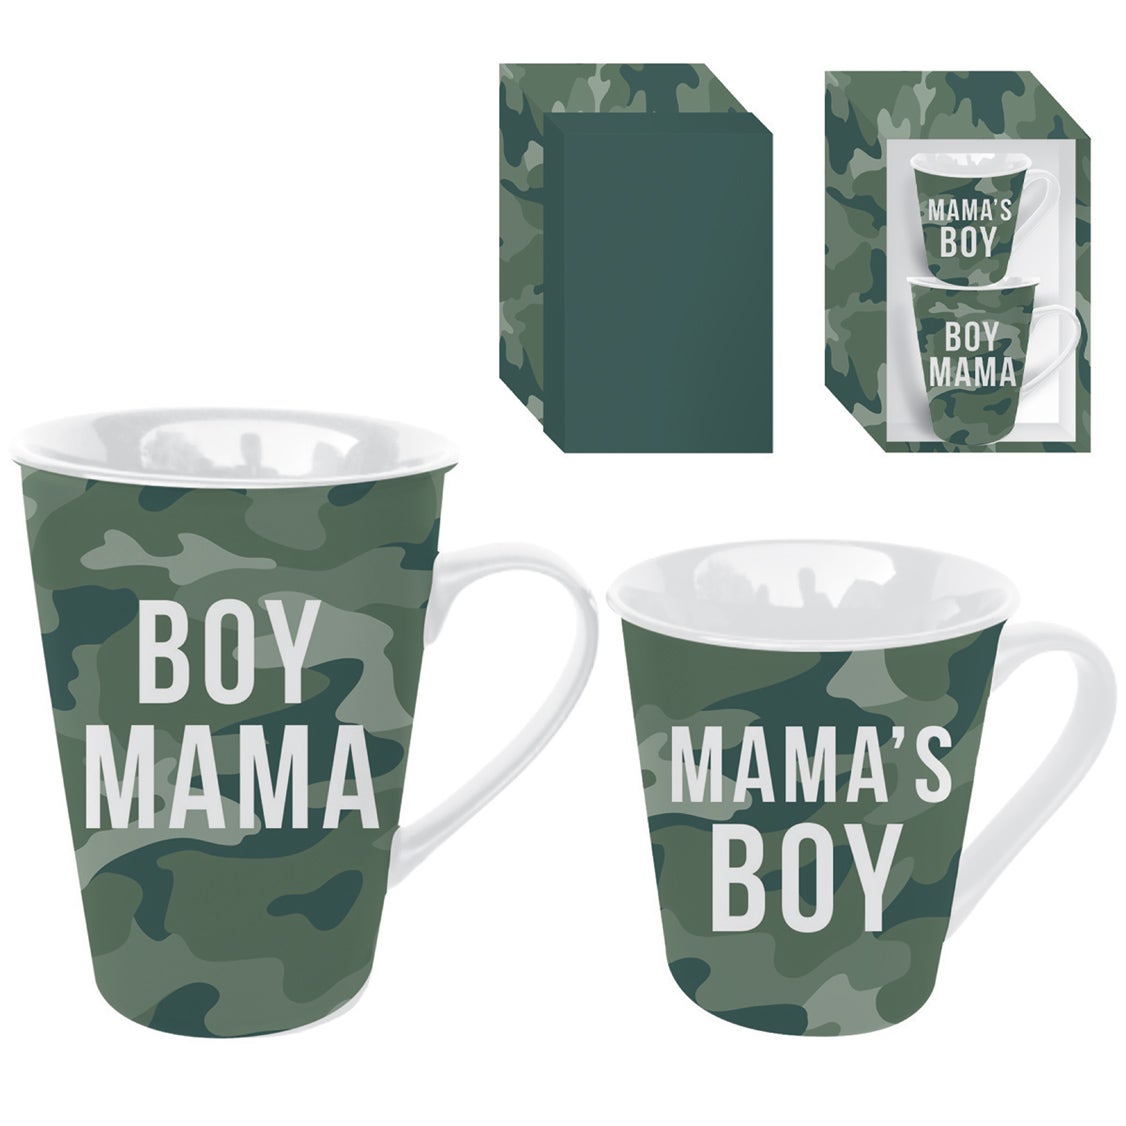 Mommy and Me Ceramic Cup Gift Set, 16 oz. and 8 oz., Boy Mama / Mama's Boy